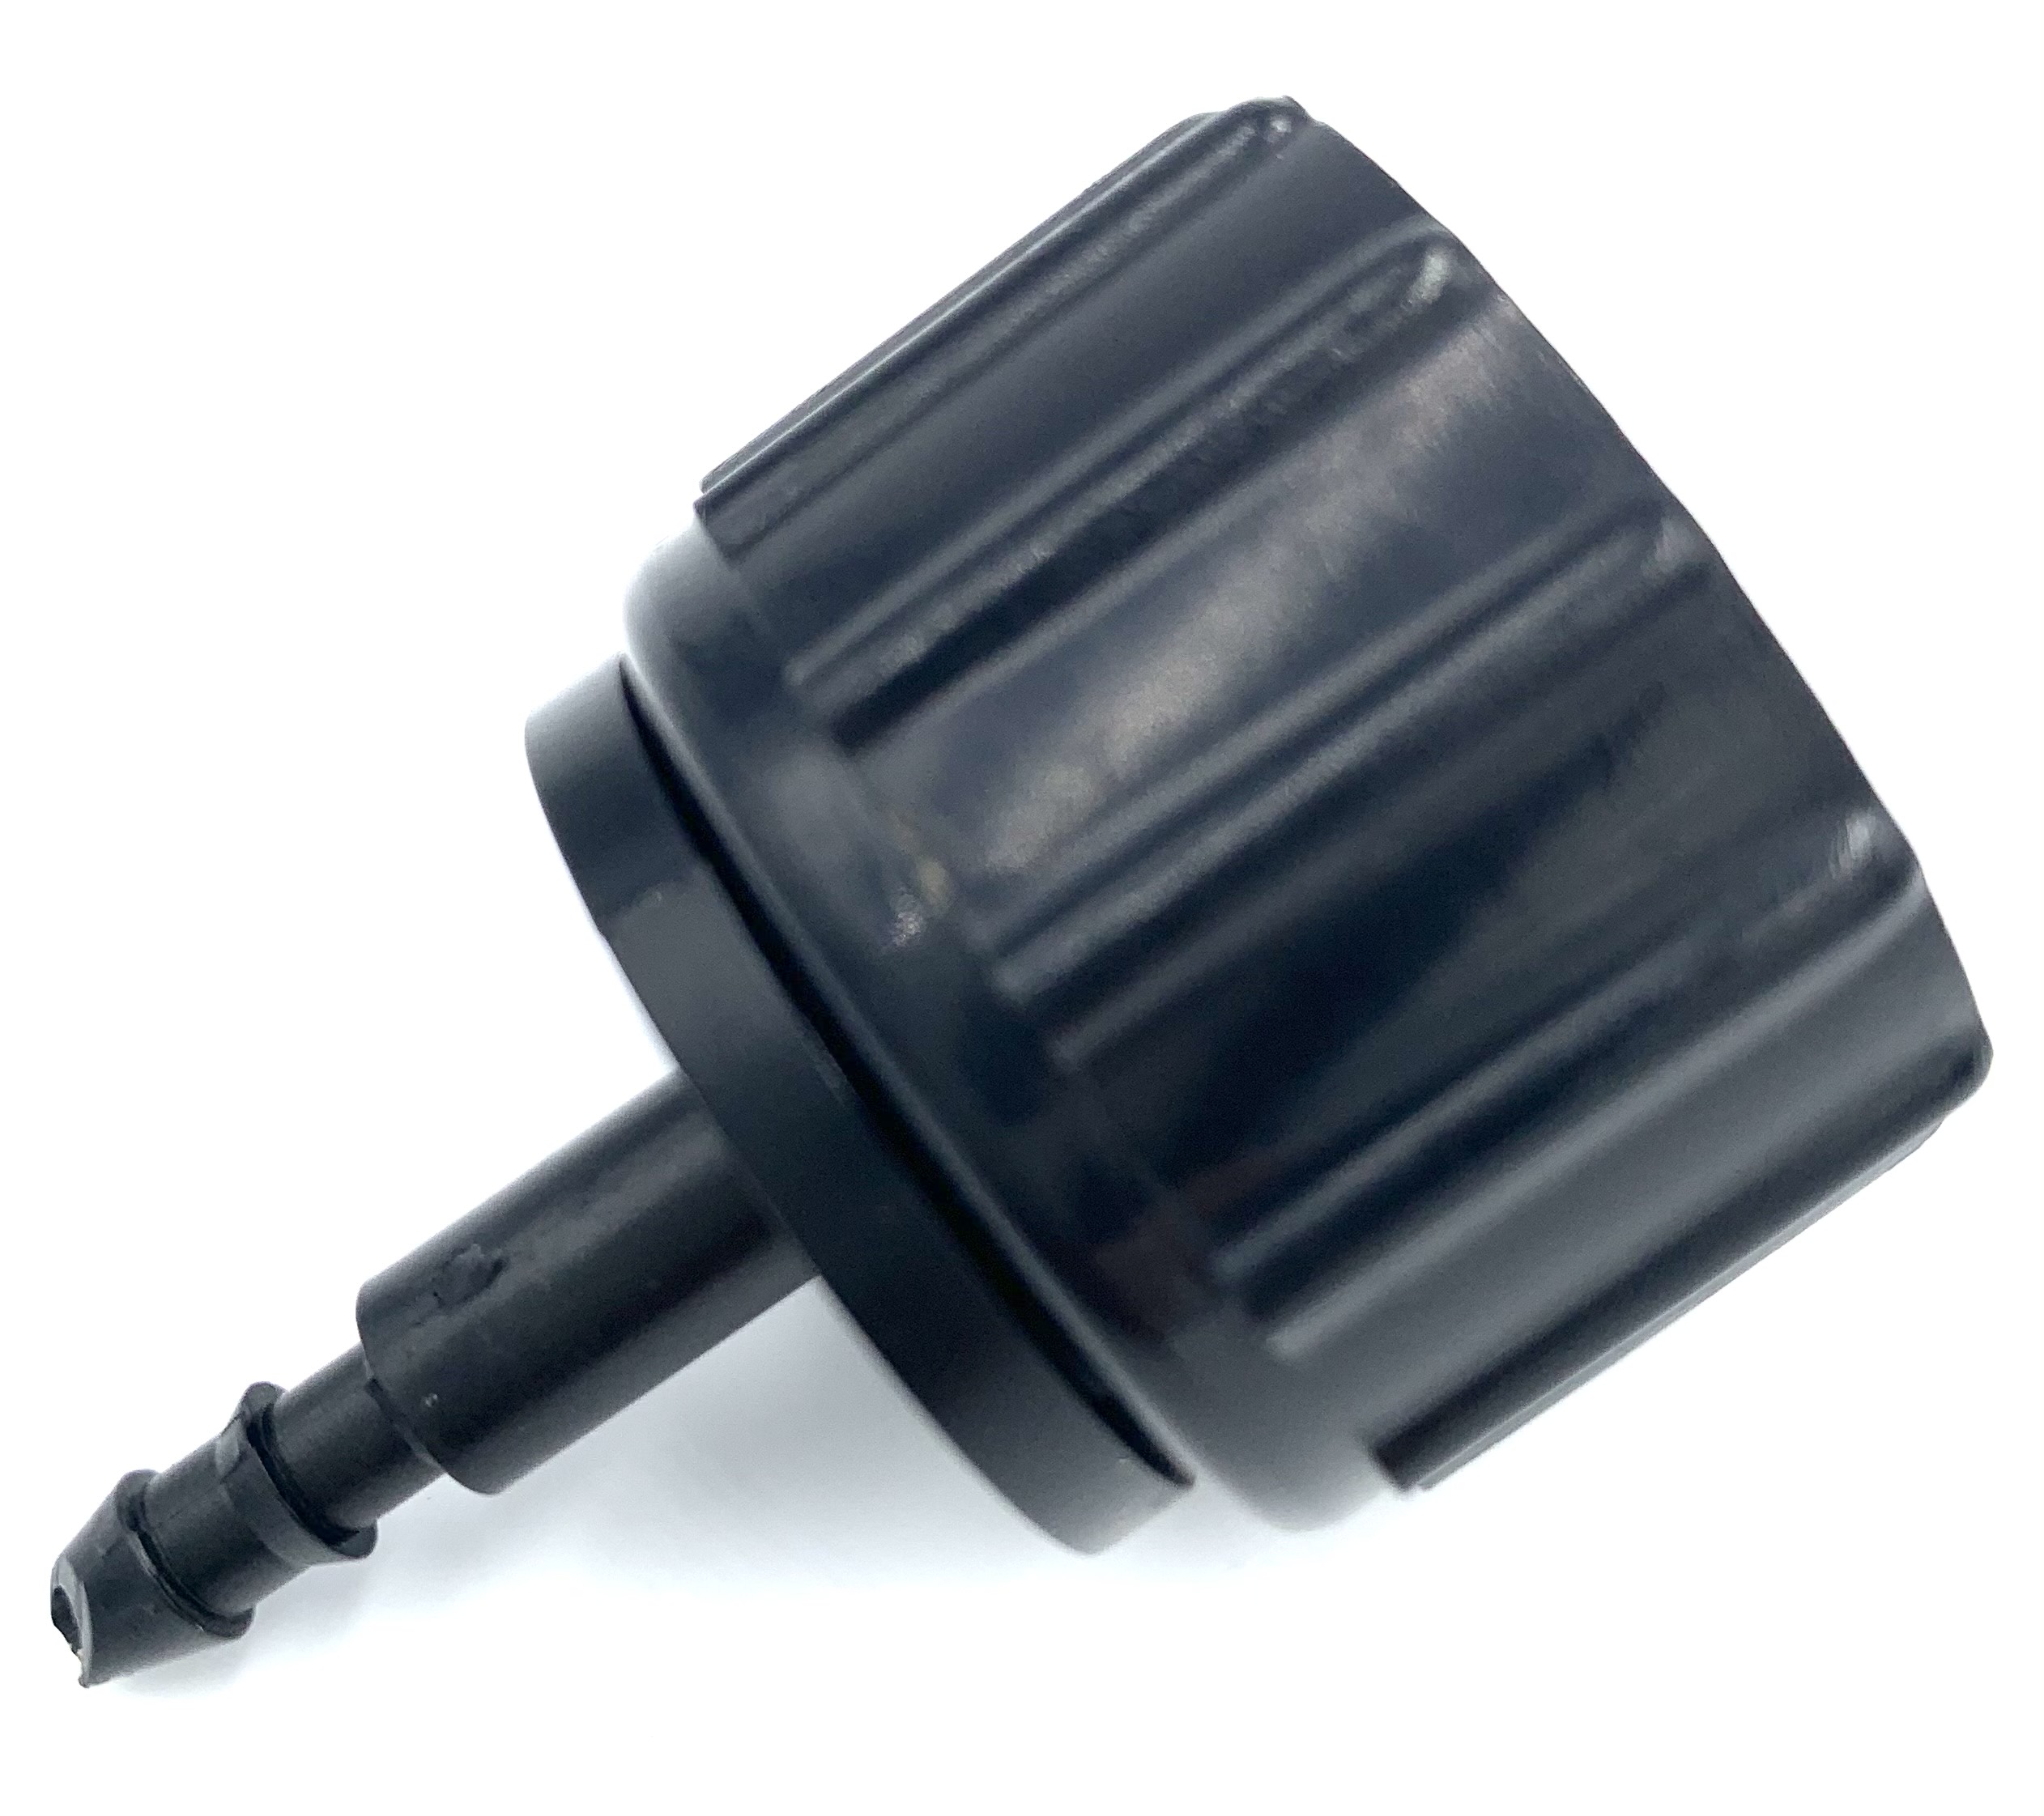 Swivel Adapter for 4mm tubing